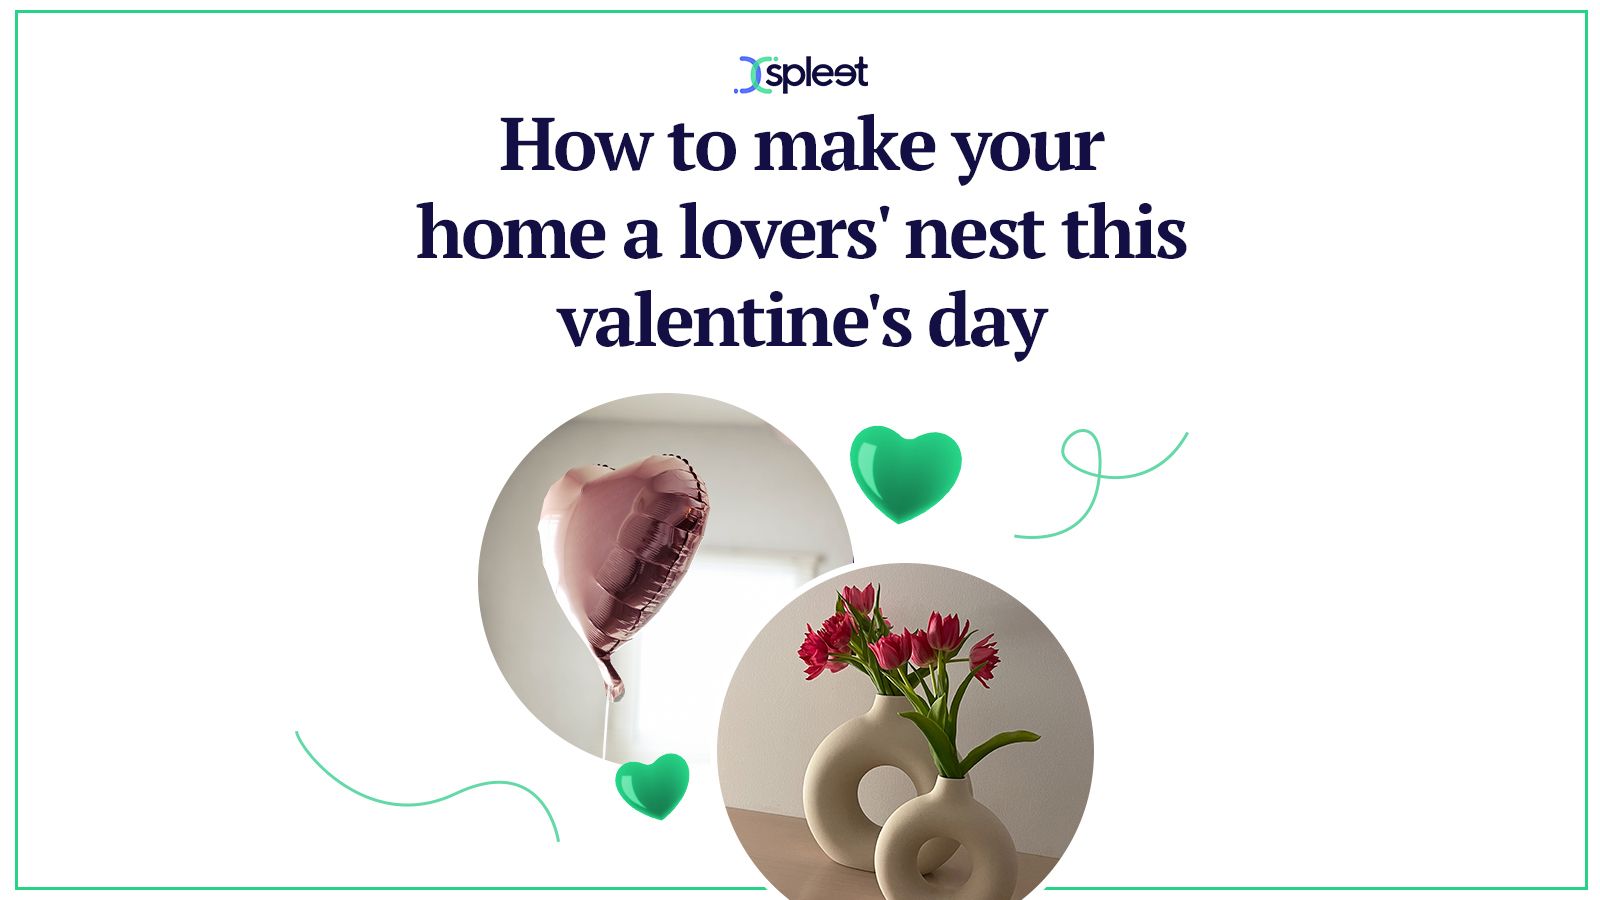 How to make your home a lovers' nest this Valentine's Day